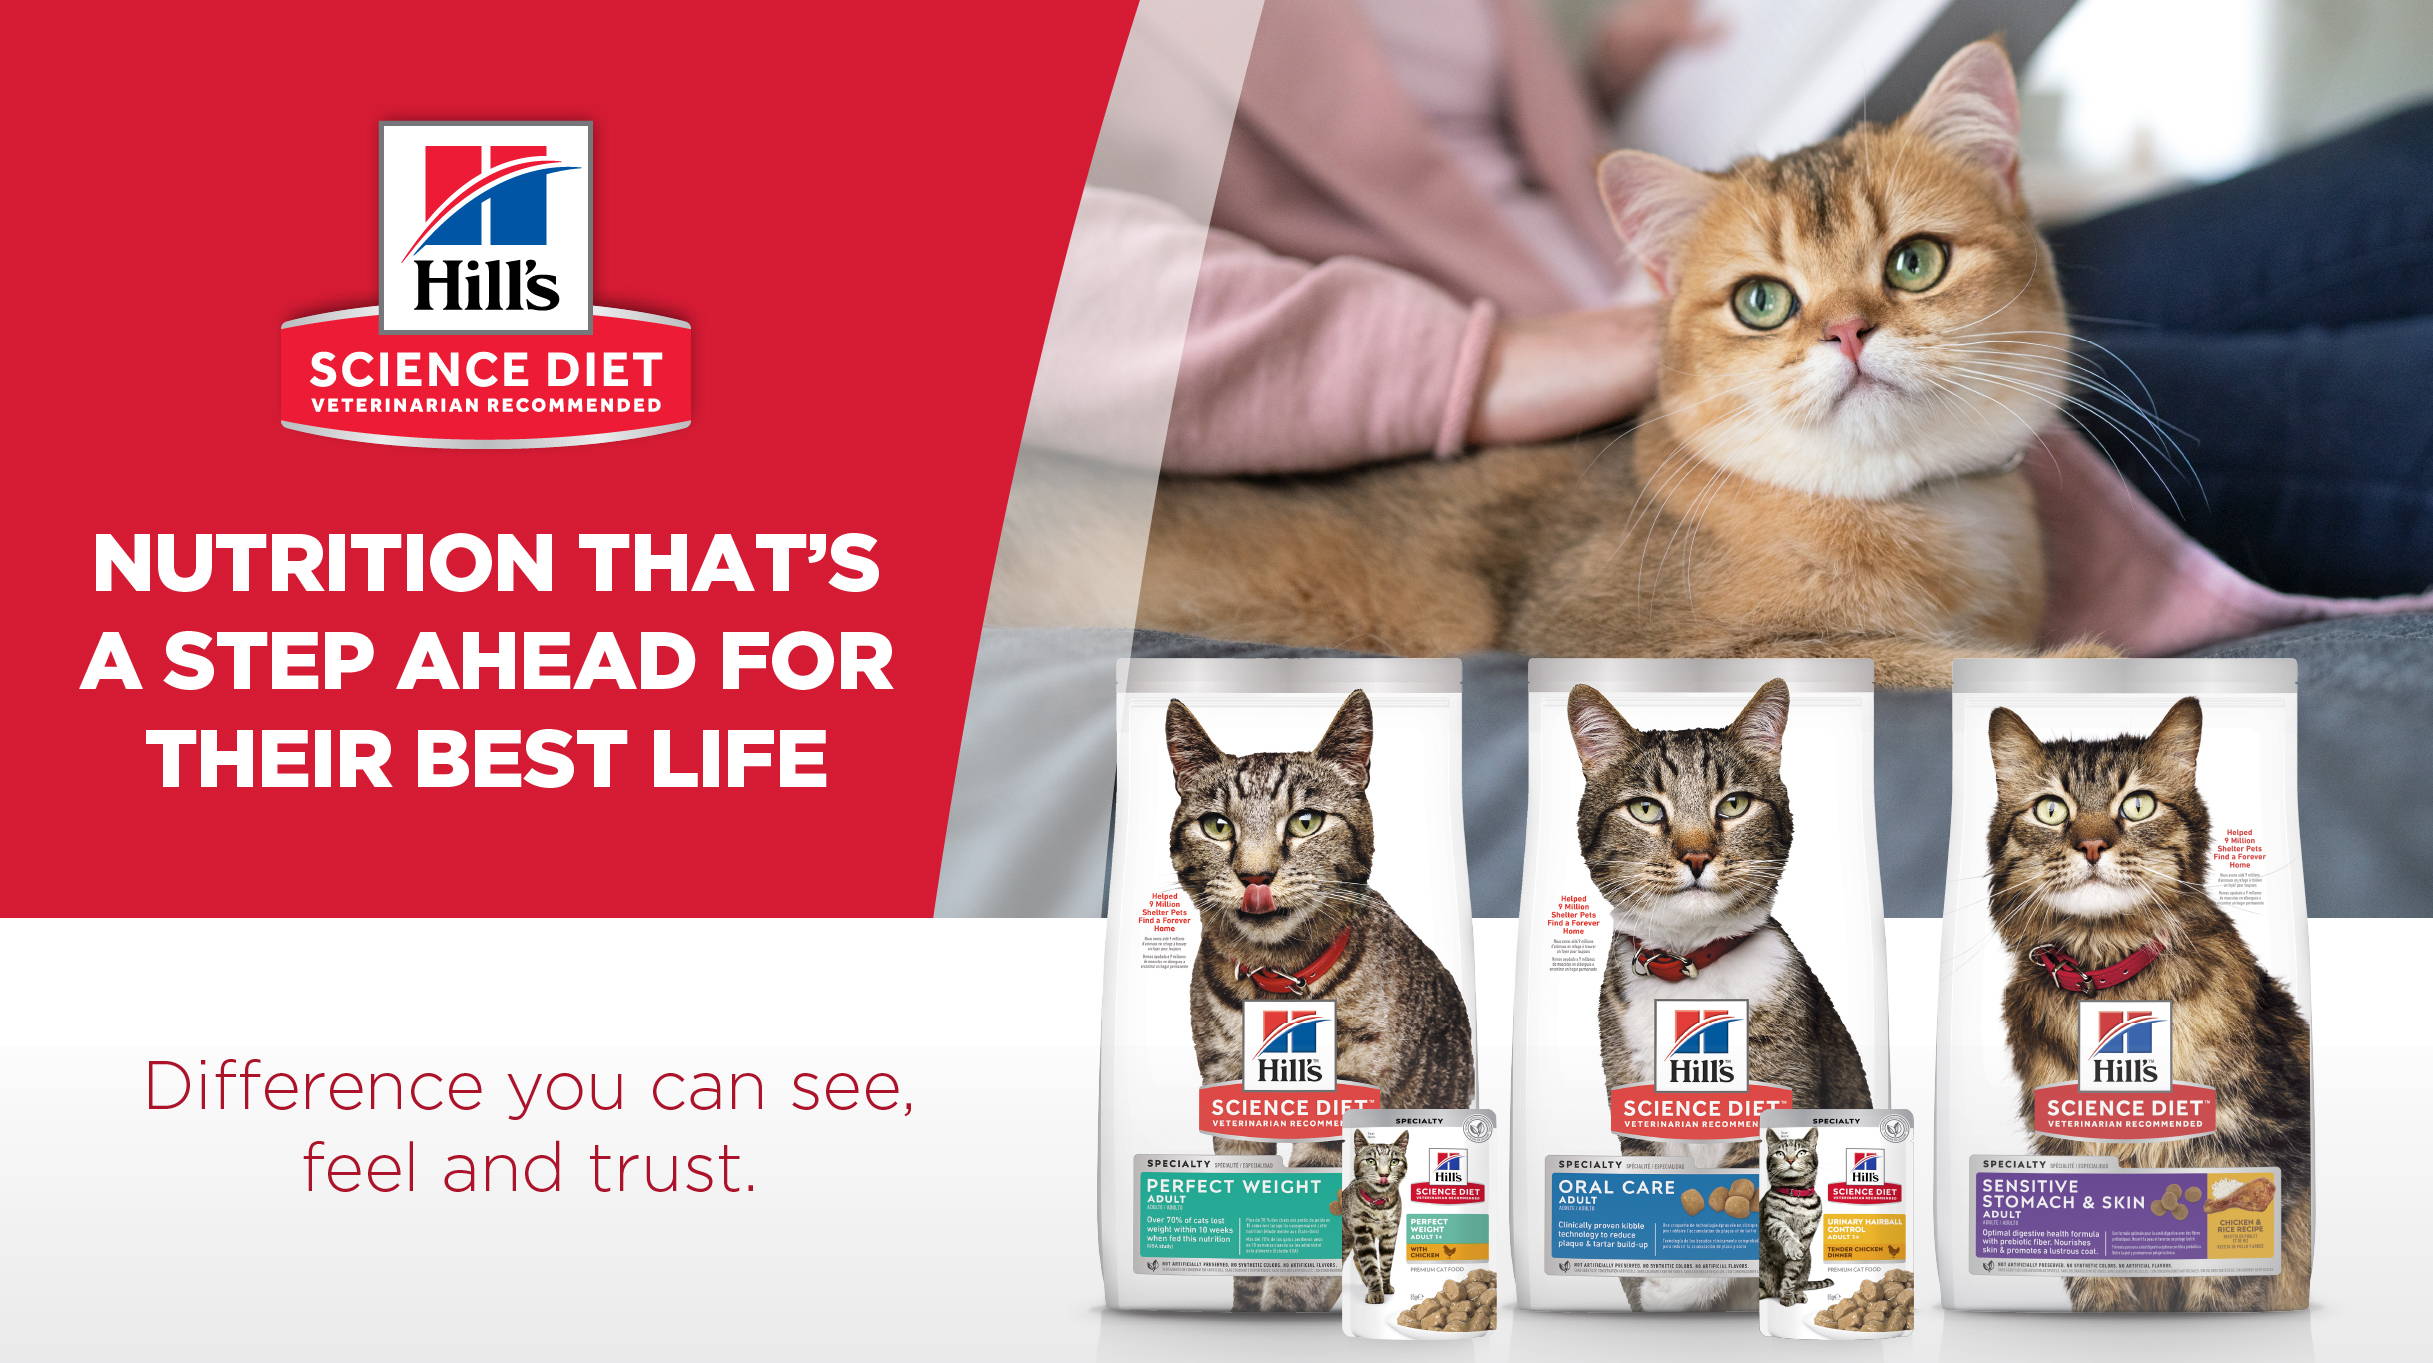 Hill's Science Diet Specialty Cat Food